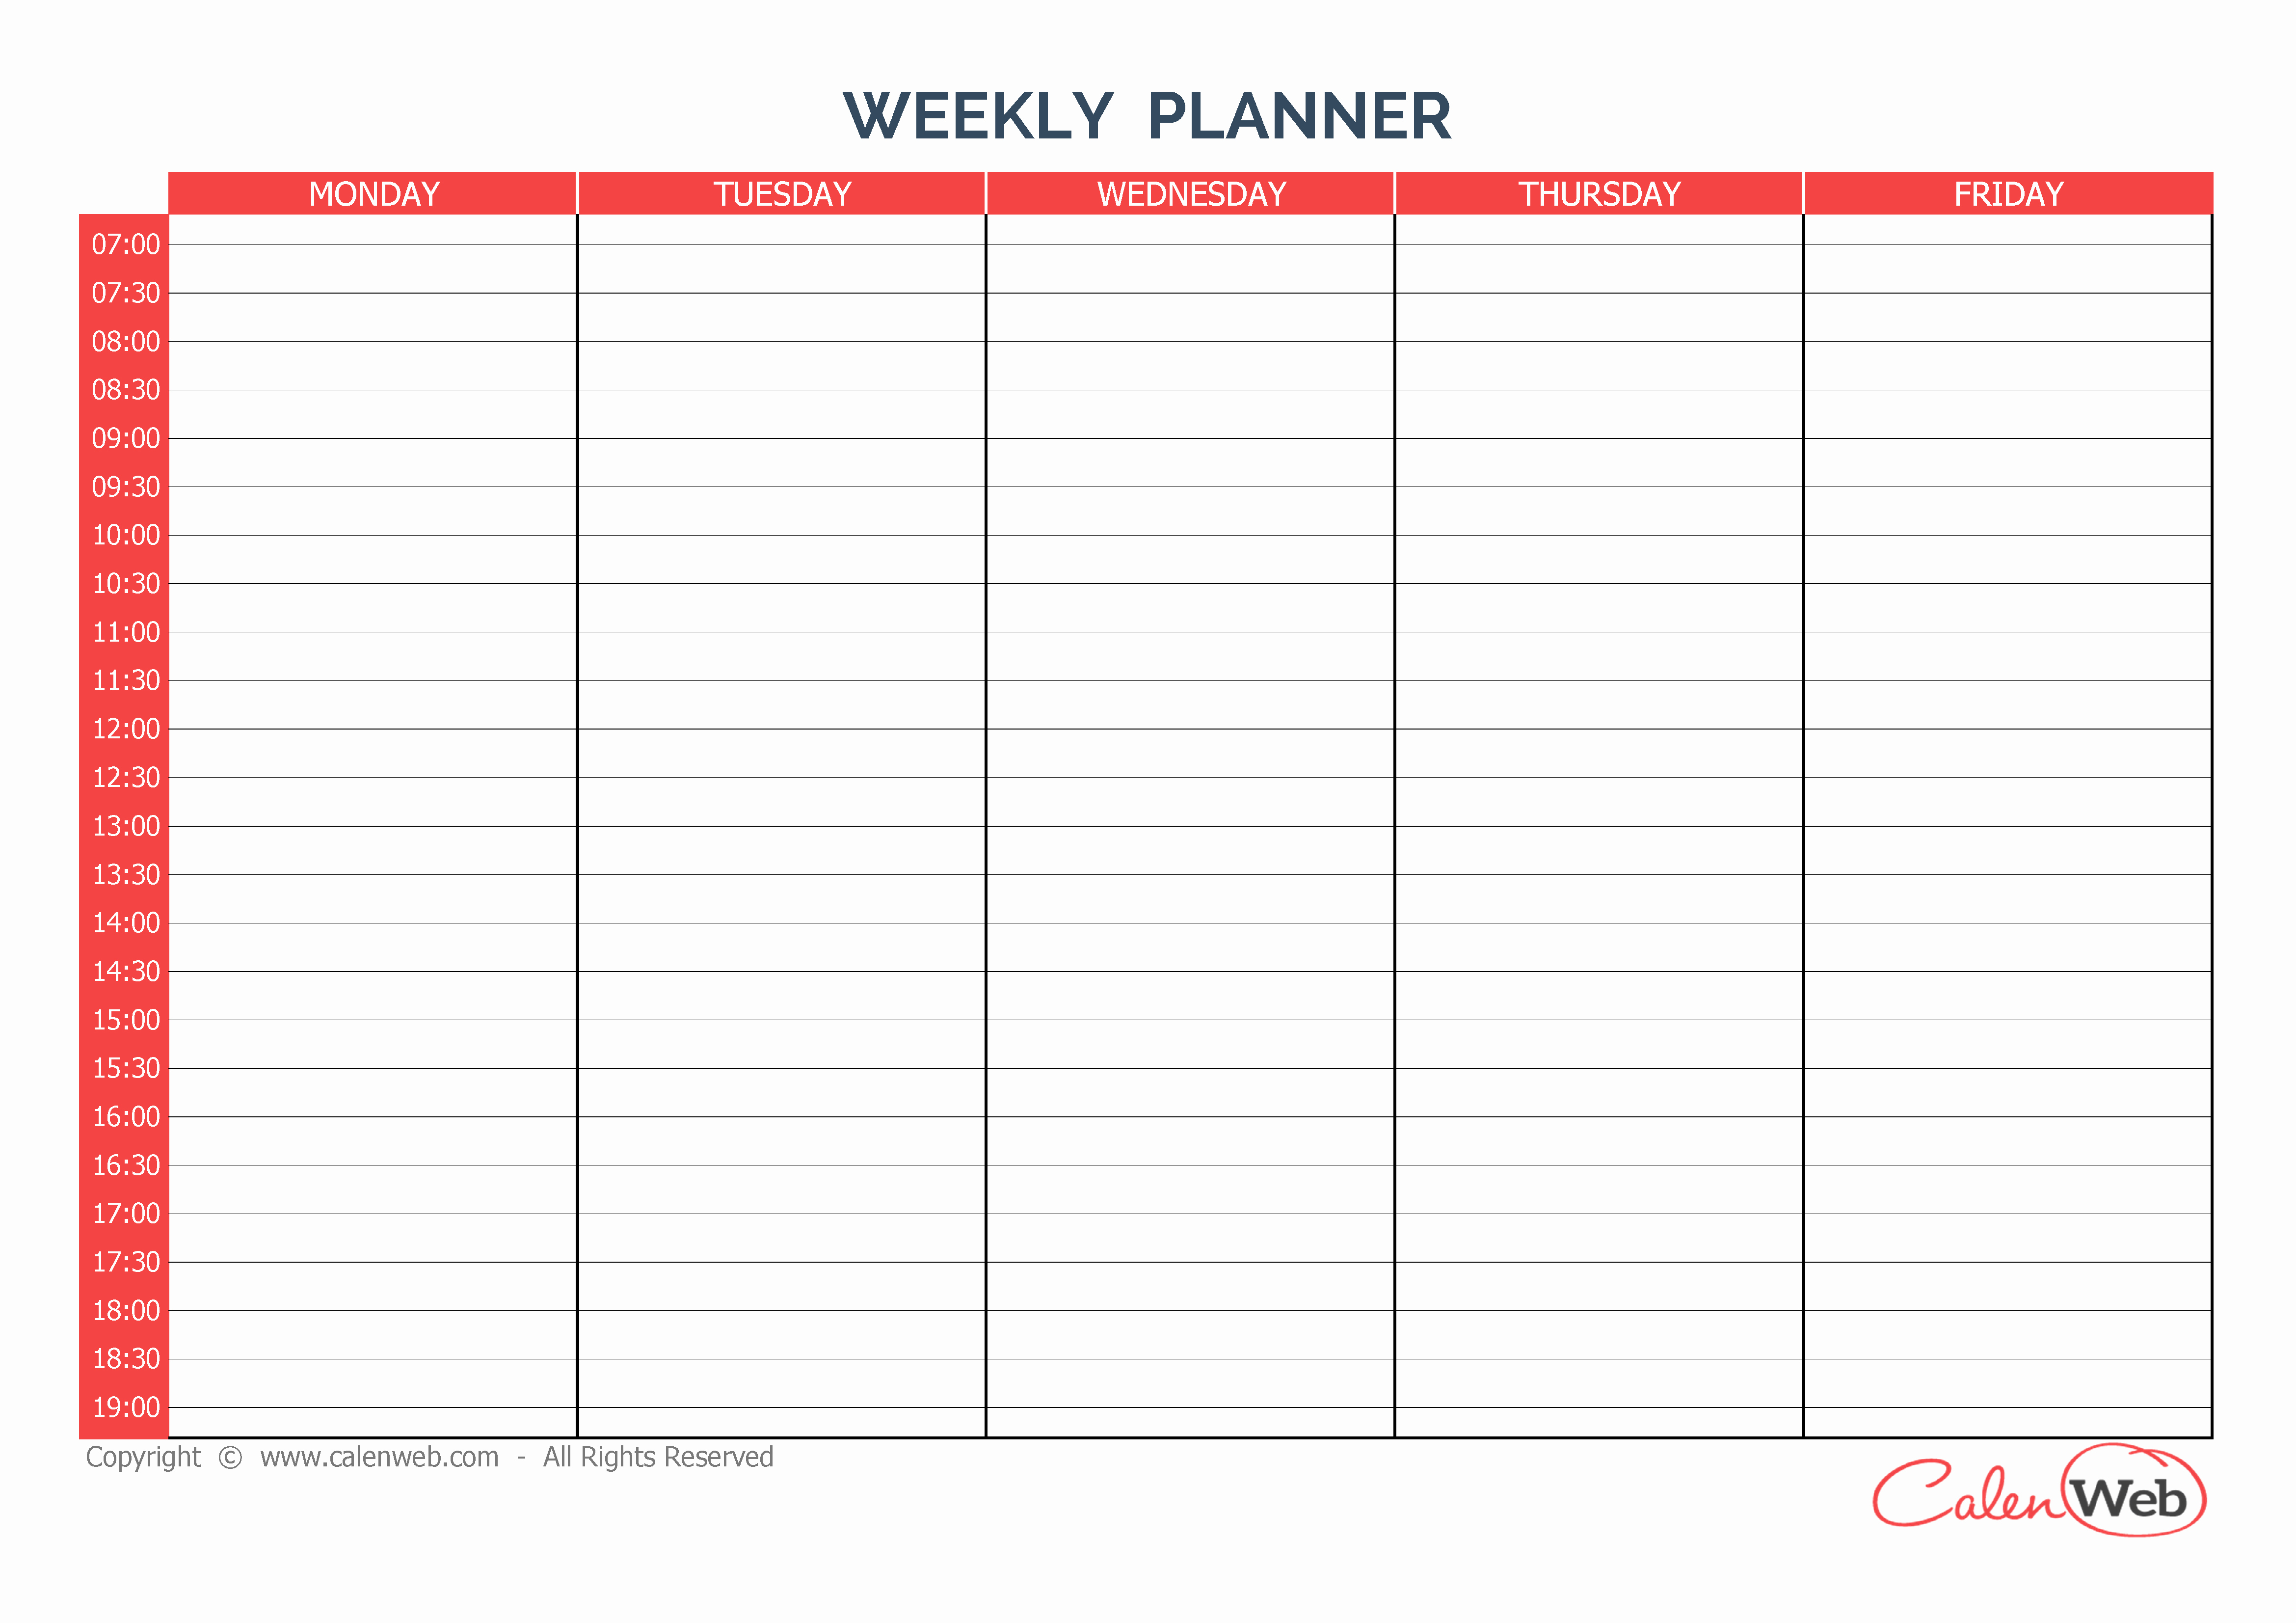 5 Day Weekly Calendar Template Best Of Weekly Planner 5 Days